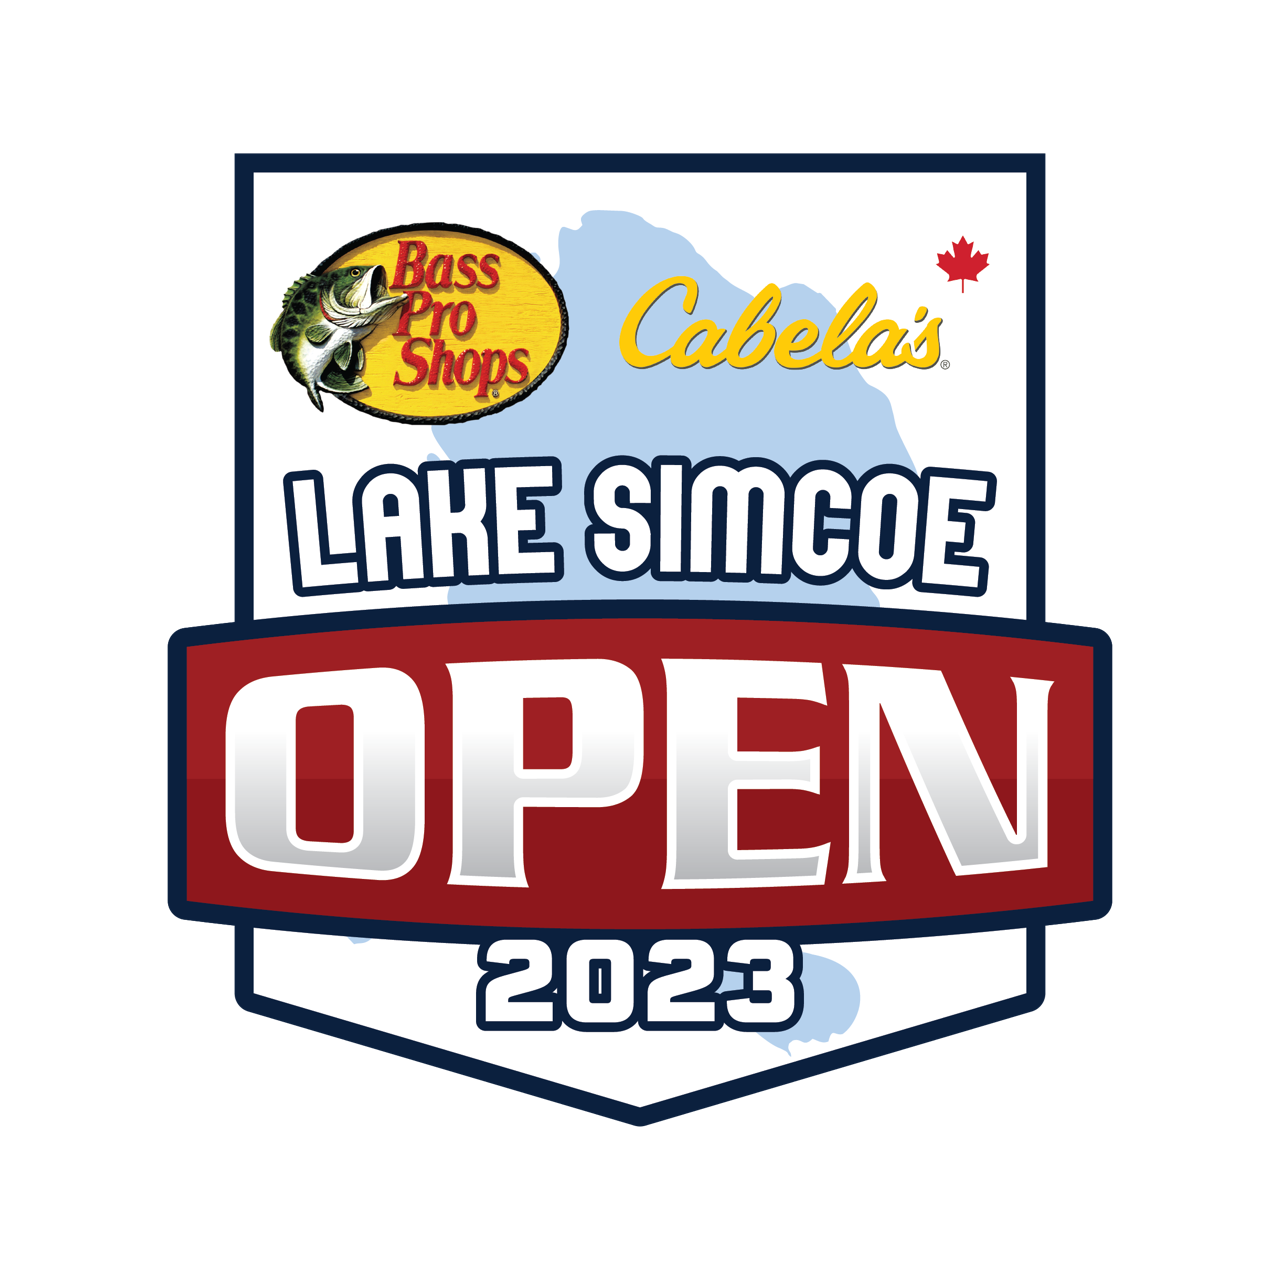 Lake Simcoe Open 2023 – Official Home Page of the Barrie Bassmasters